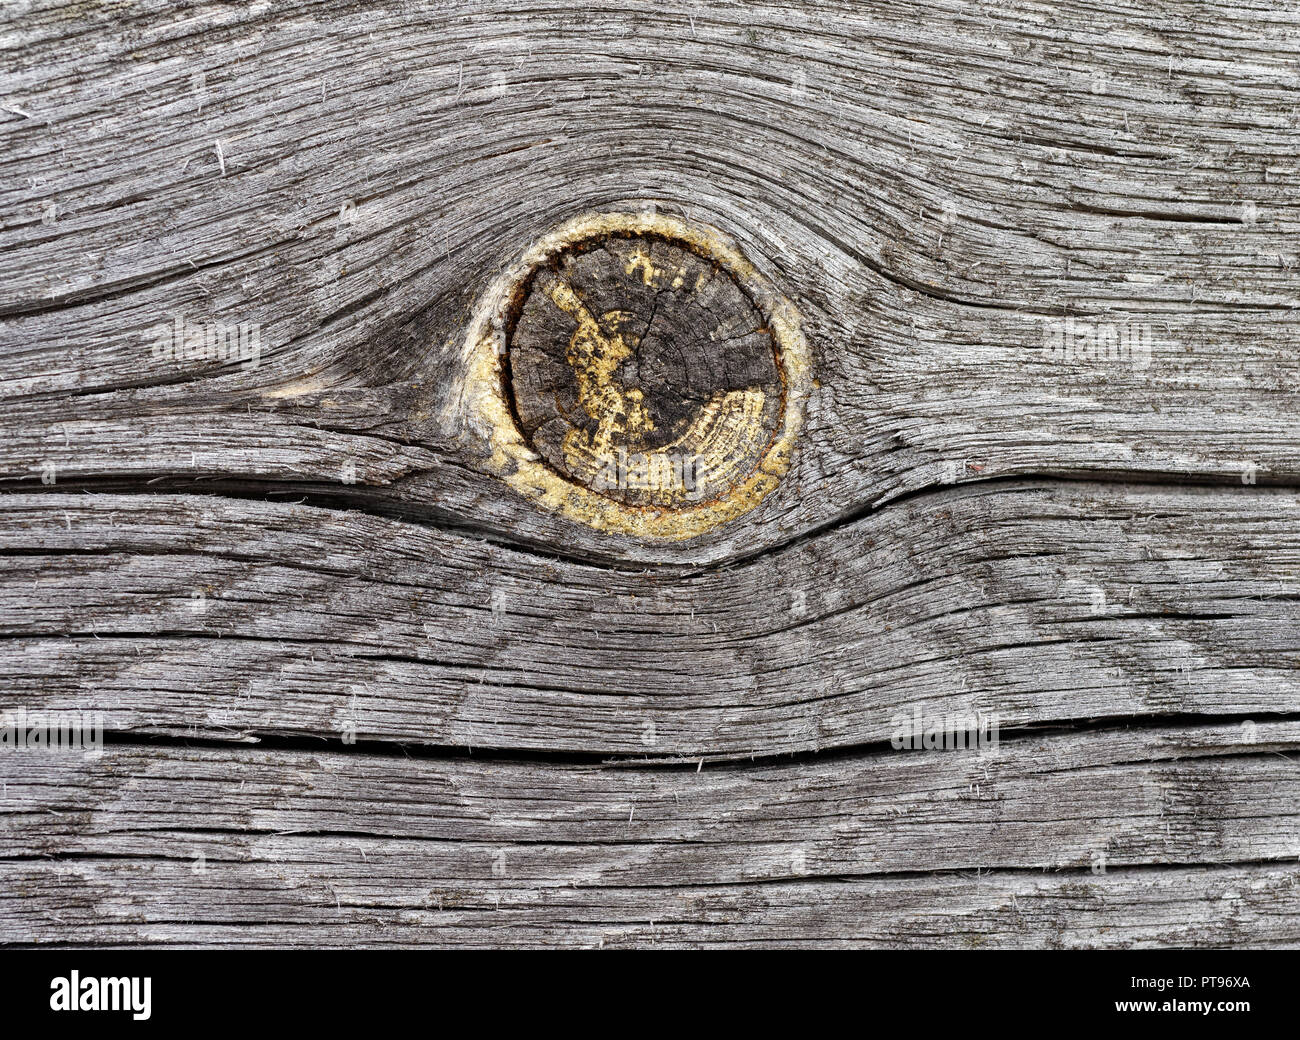 Backgrounds and textures: old weathered wooden plank surface Stock Photo